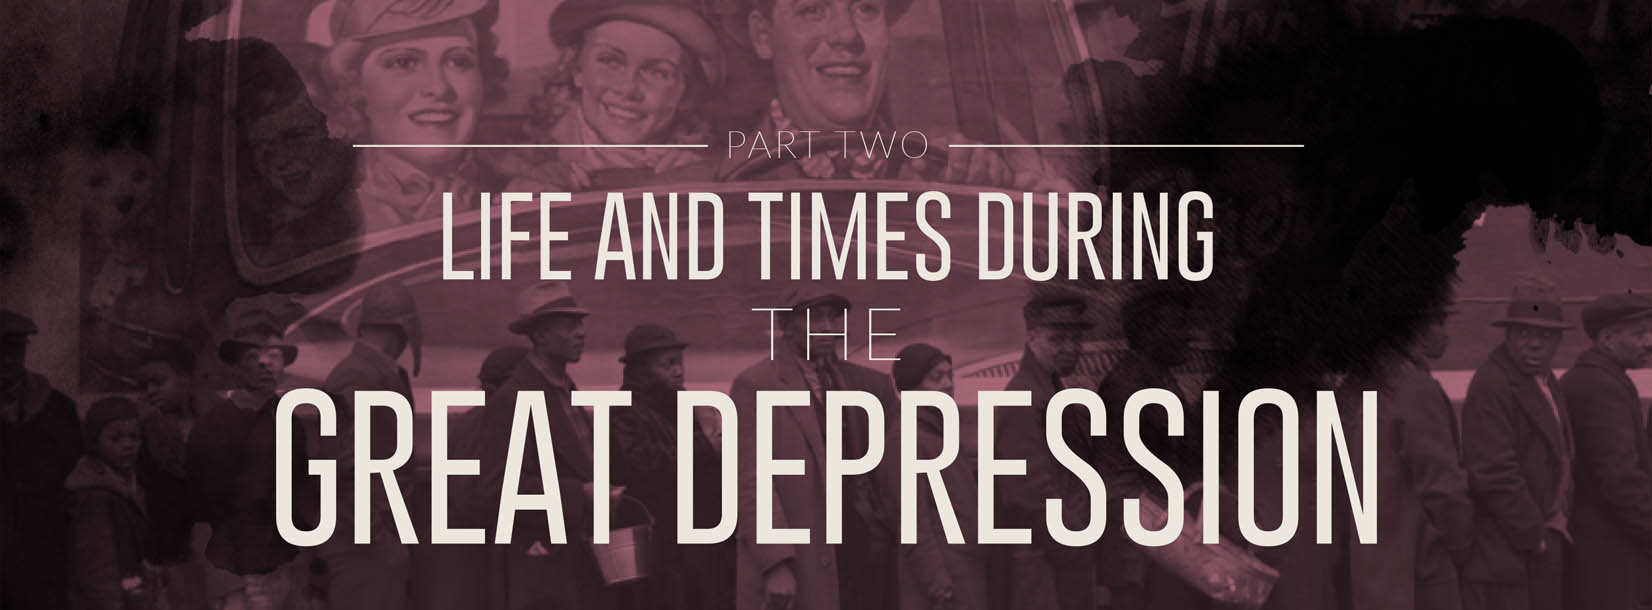 Life and Times During the Great Depression (Infographic)